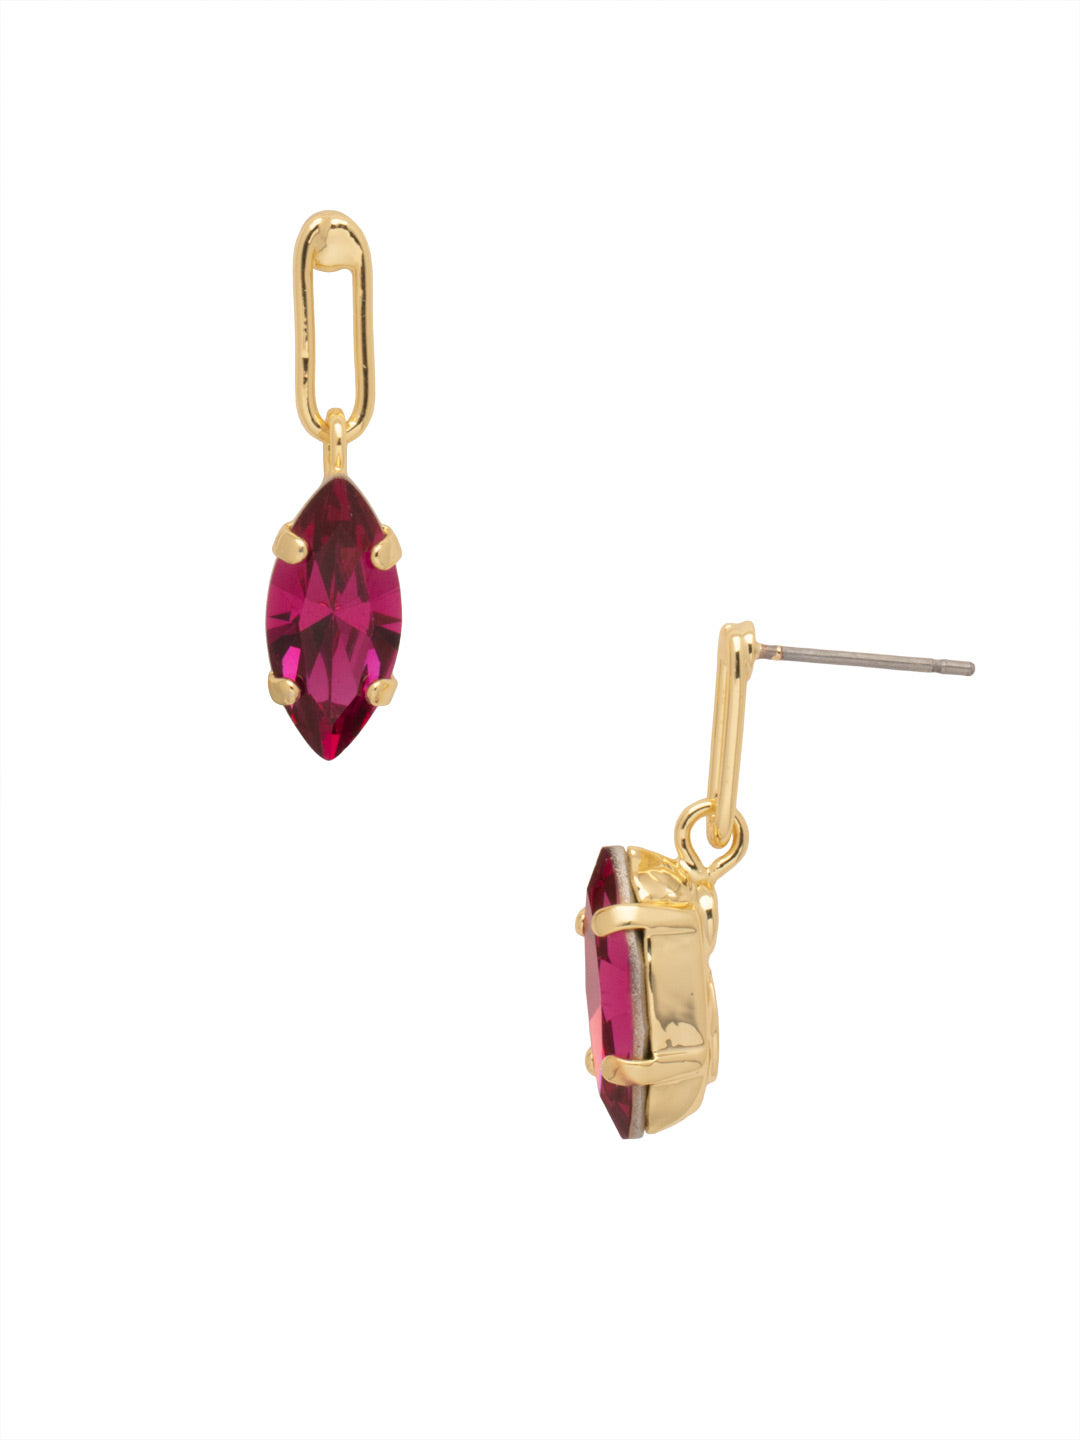 Clarissa Chain Link Dangle Earrings - 8EA10BGFU - <p>The Clarissa Chain Link Dangle Earrings feature a navette cut crystal dangling from a single chain link on a post. From Sorrelli's Fuchsia collection in our Bright Gold-tone finish.</p>